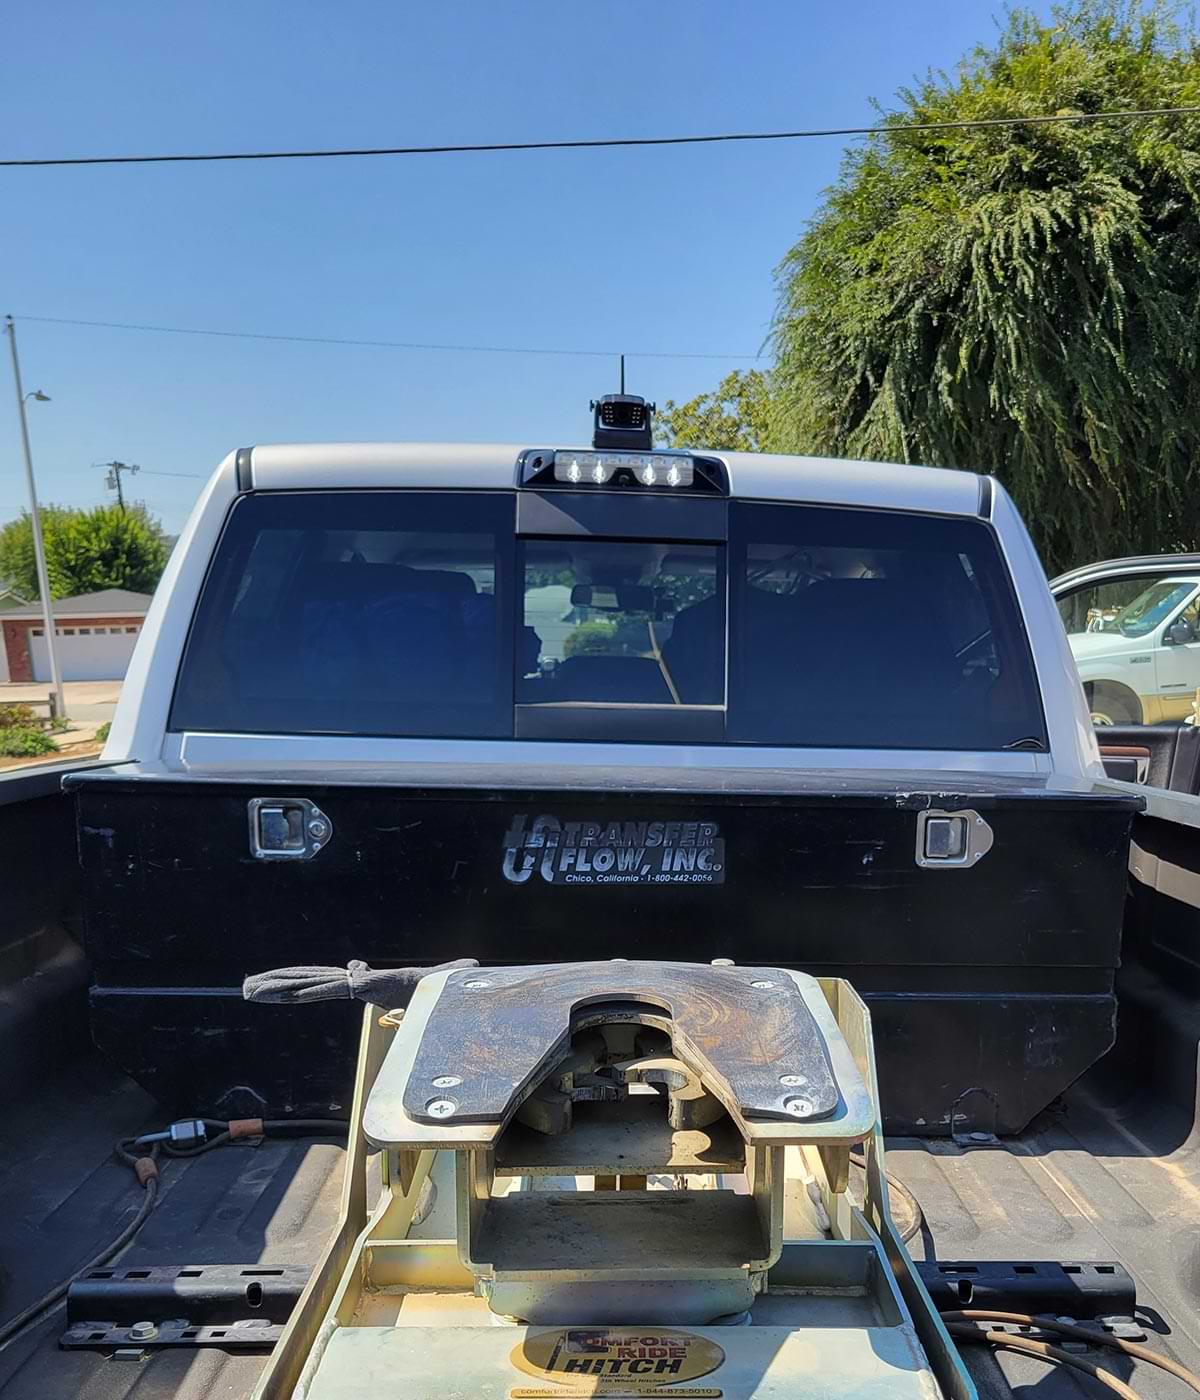 back view of a heavy duty pickup truck with the DoHonest camera mounted atop the cab